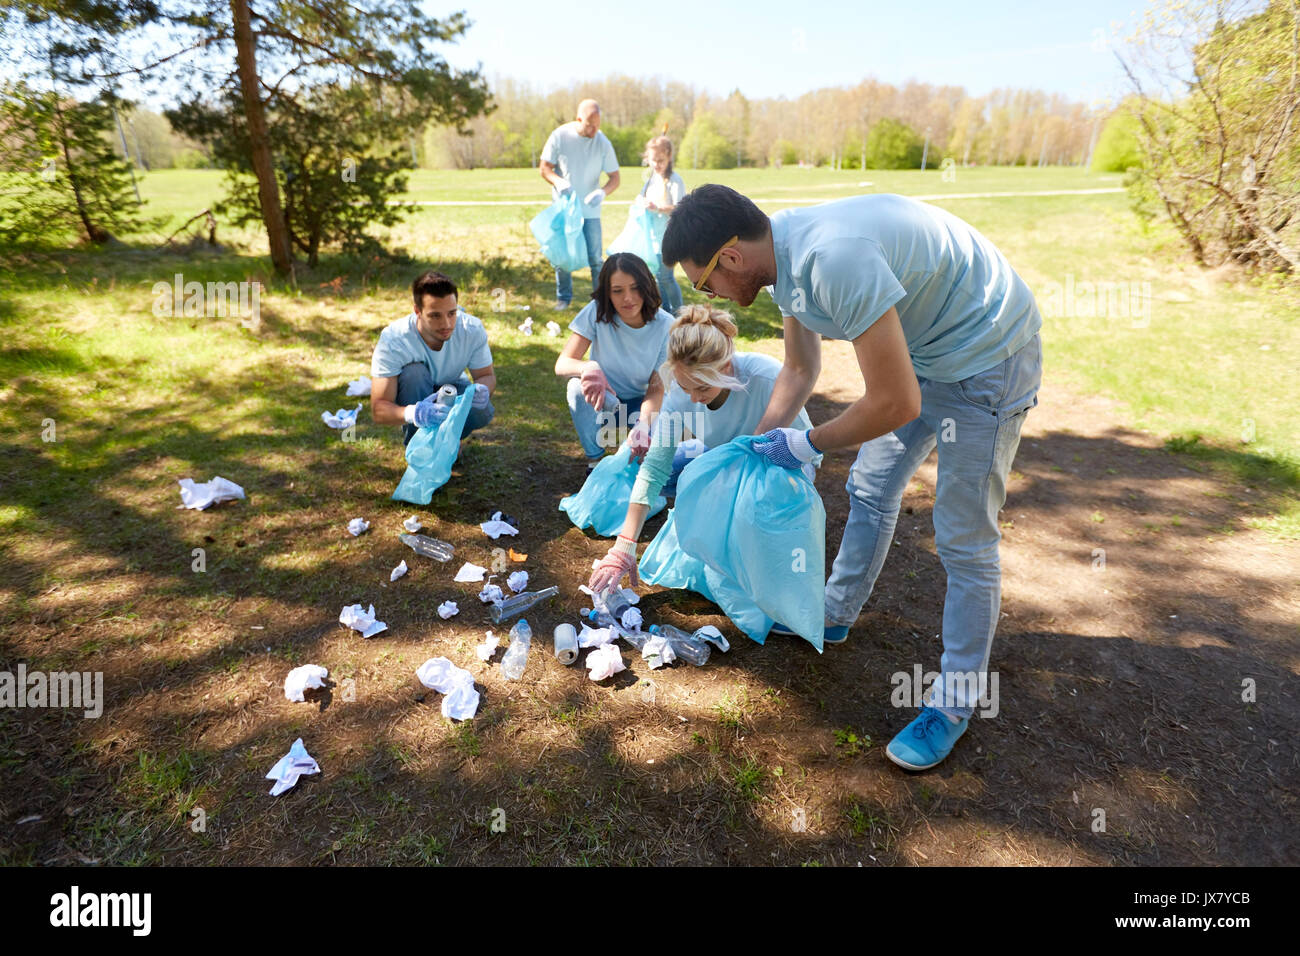 volunteers with garbage bags cleaning park area Stock Photo